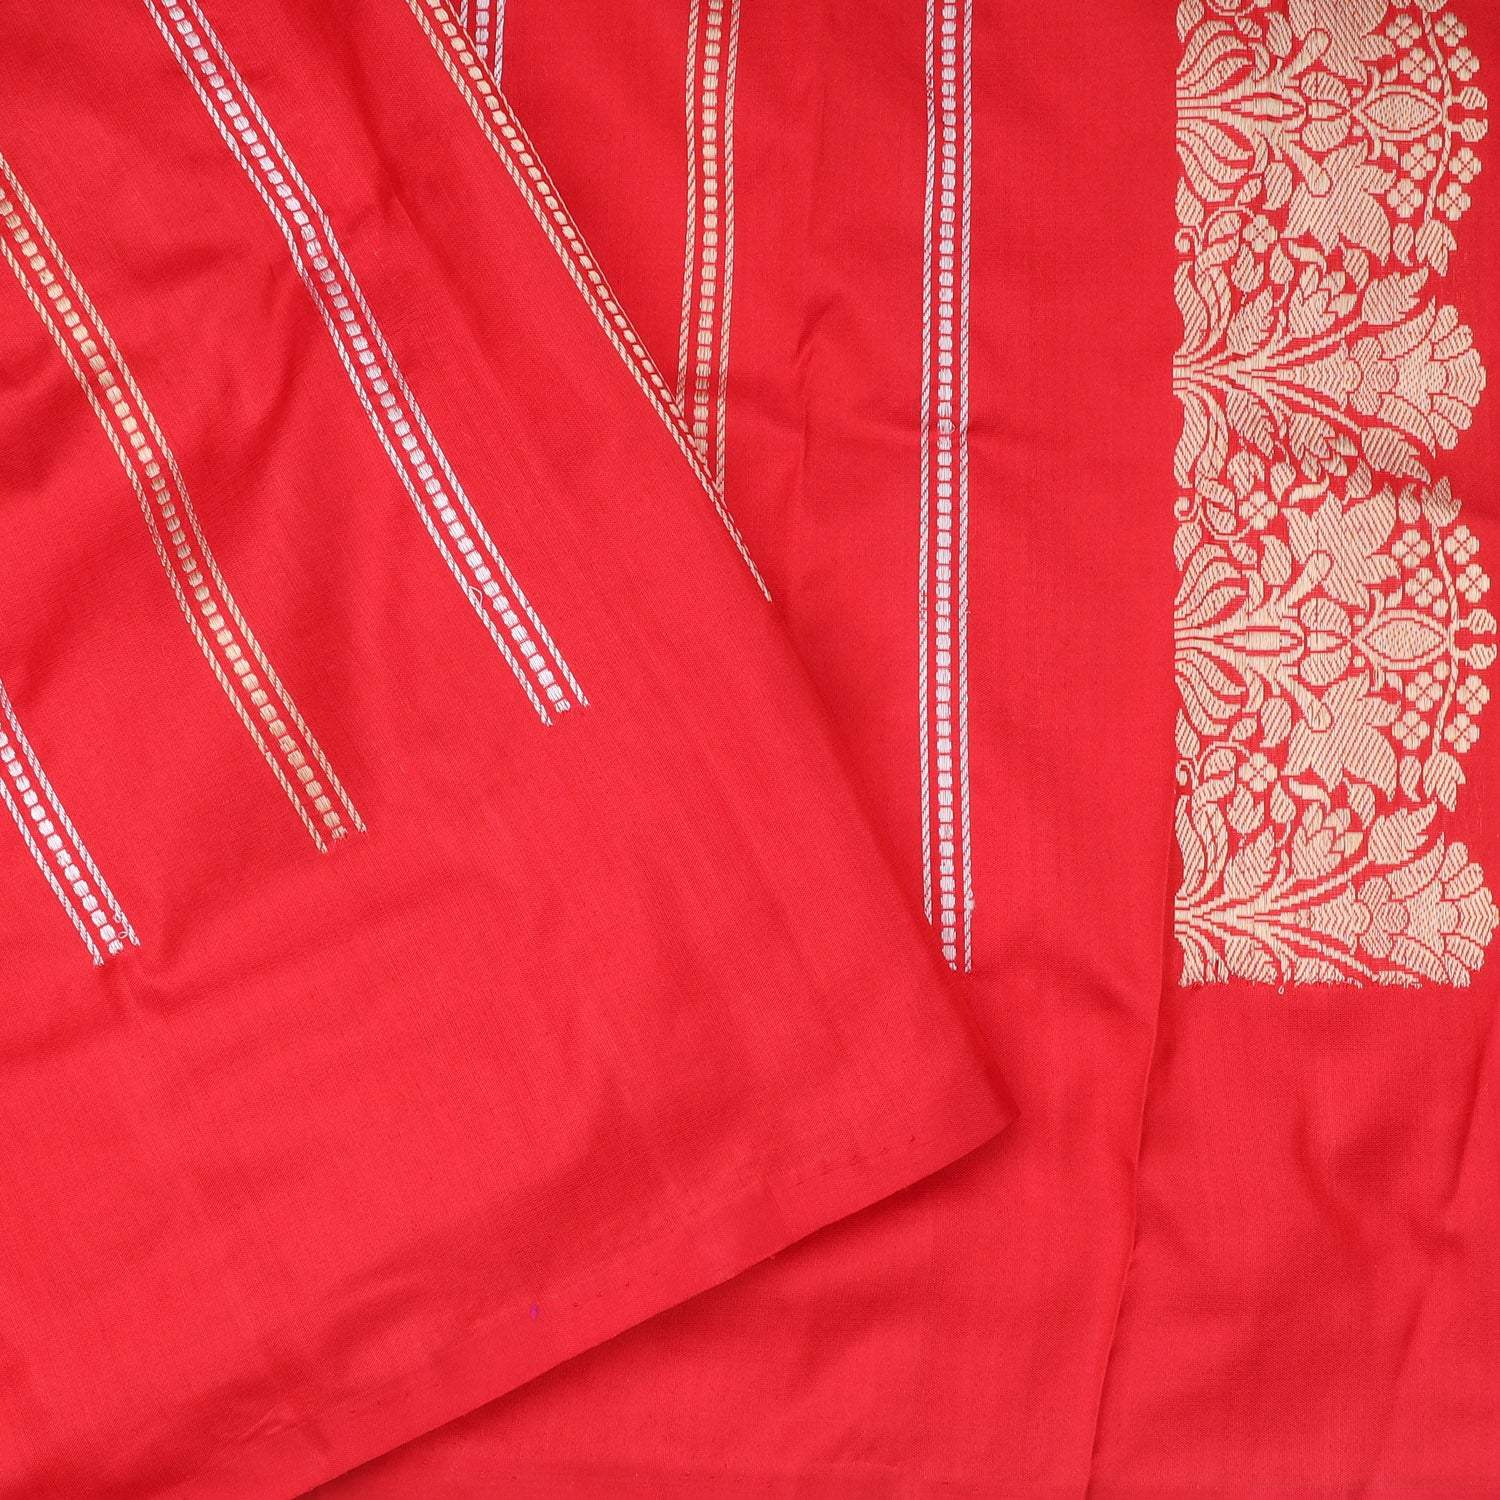 Vibrant Red Banarasi Silk Saree With Floral Stripes Pattern - Singhania's